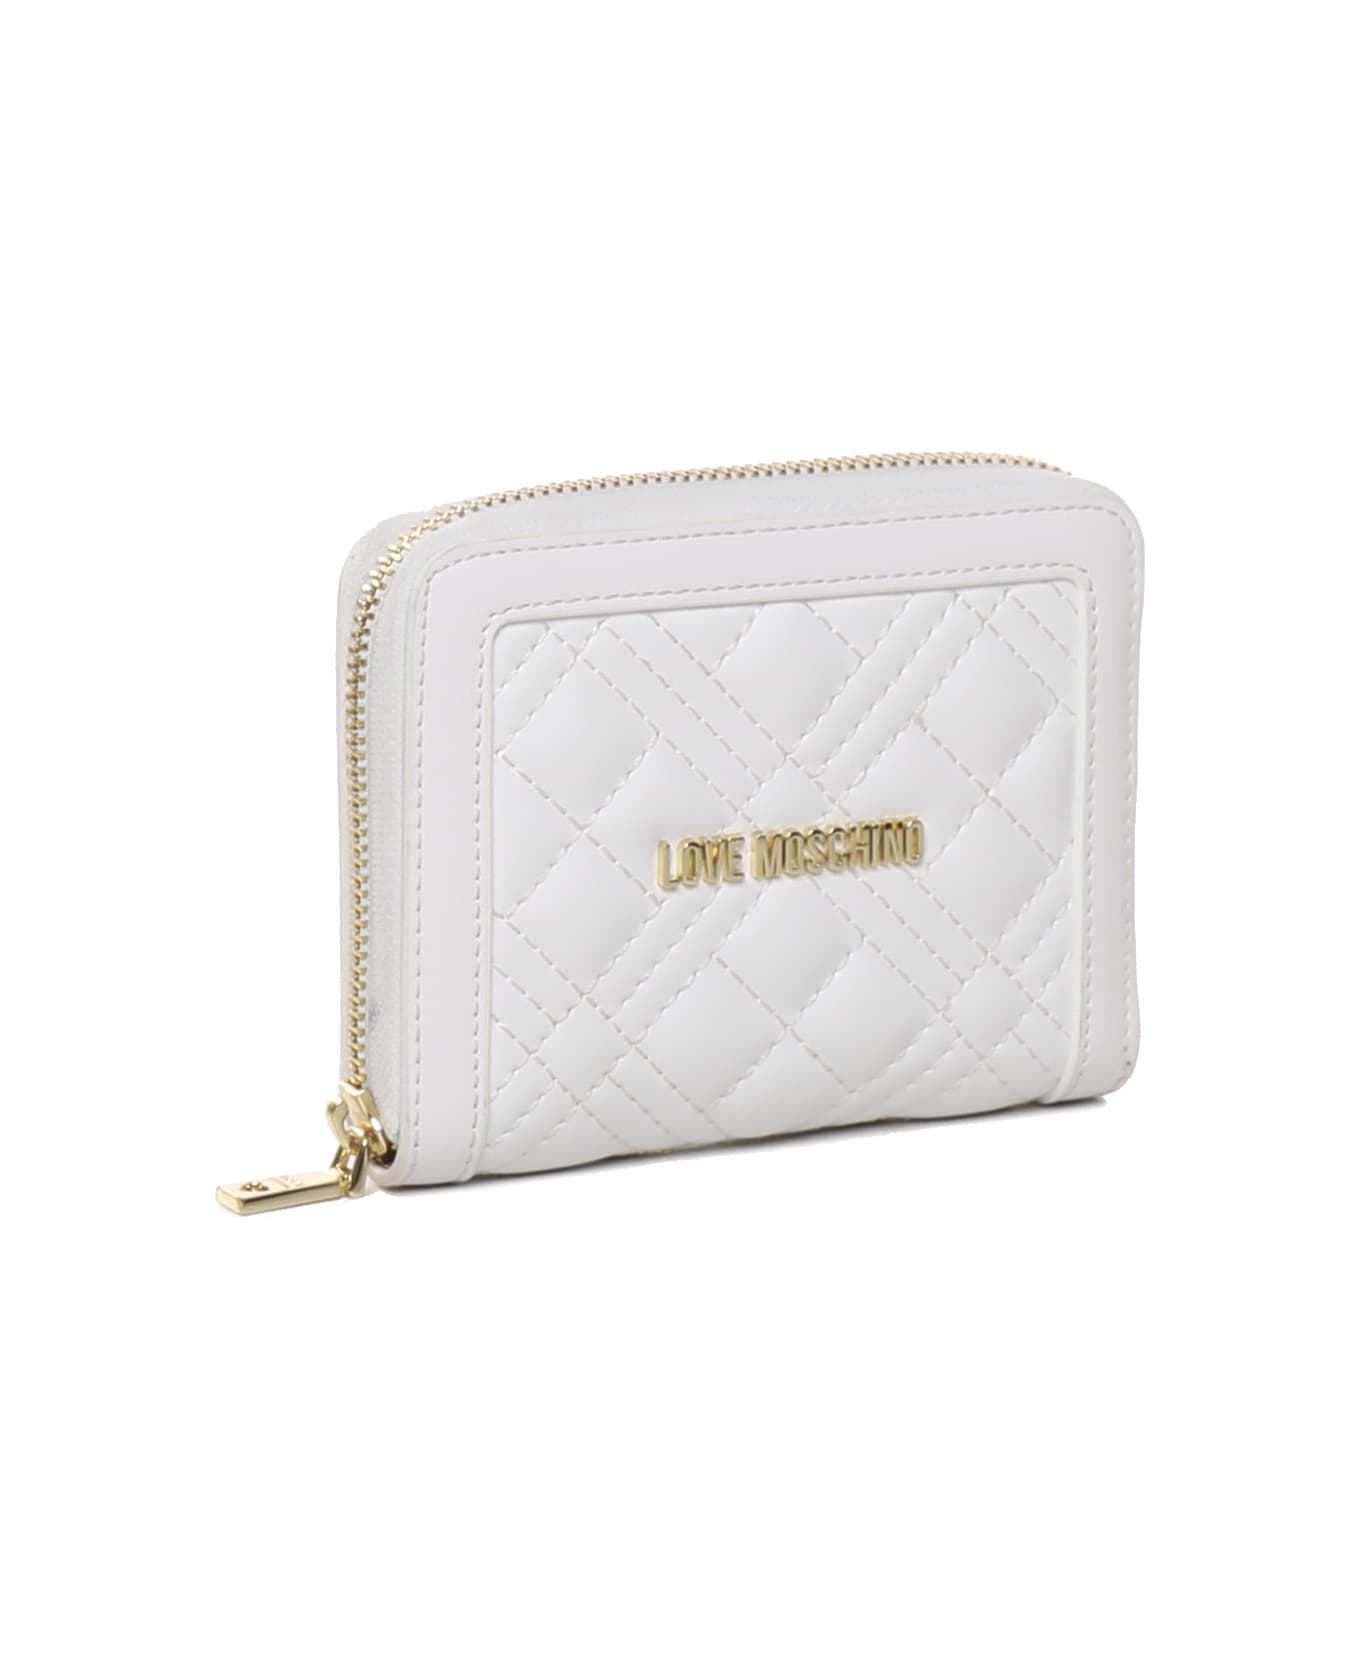 Love Moschino Quilted Wallet - Offwhite 財布